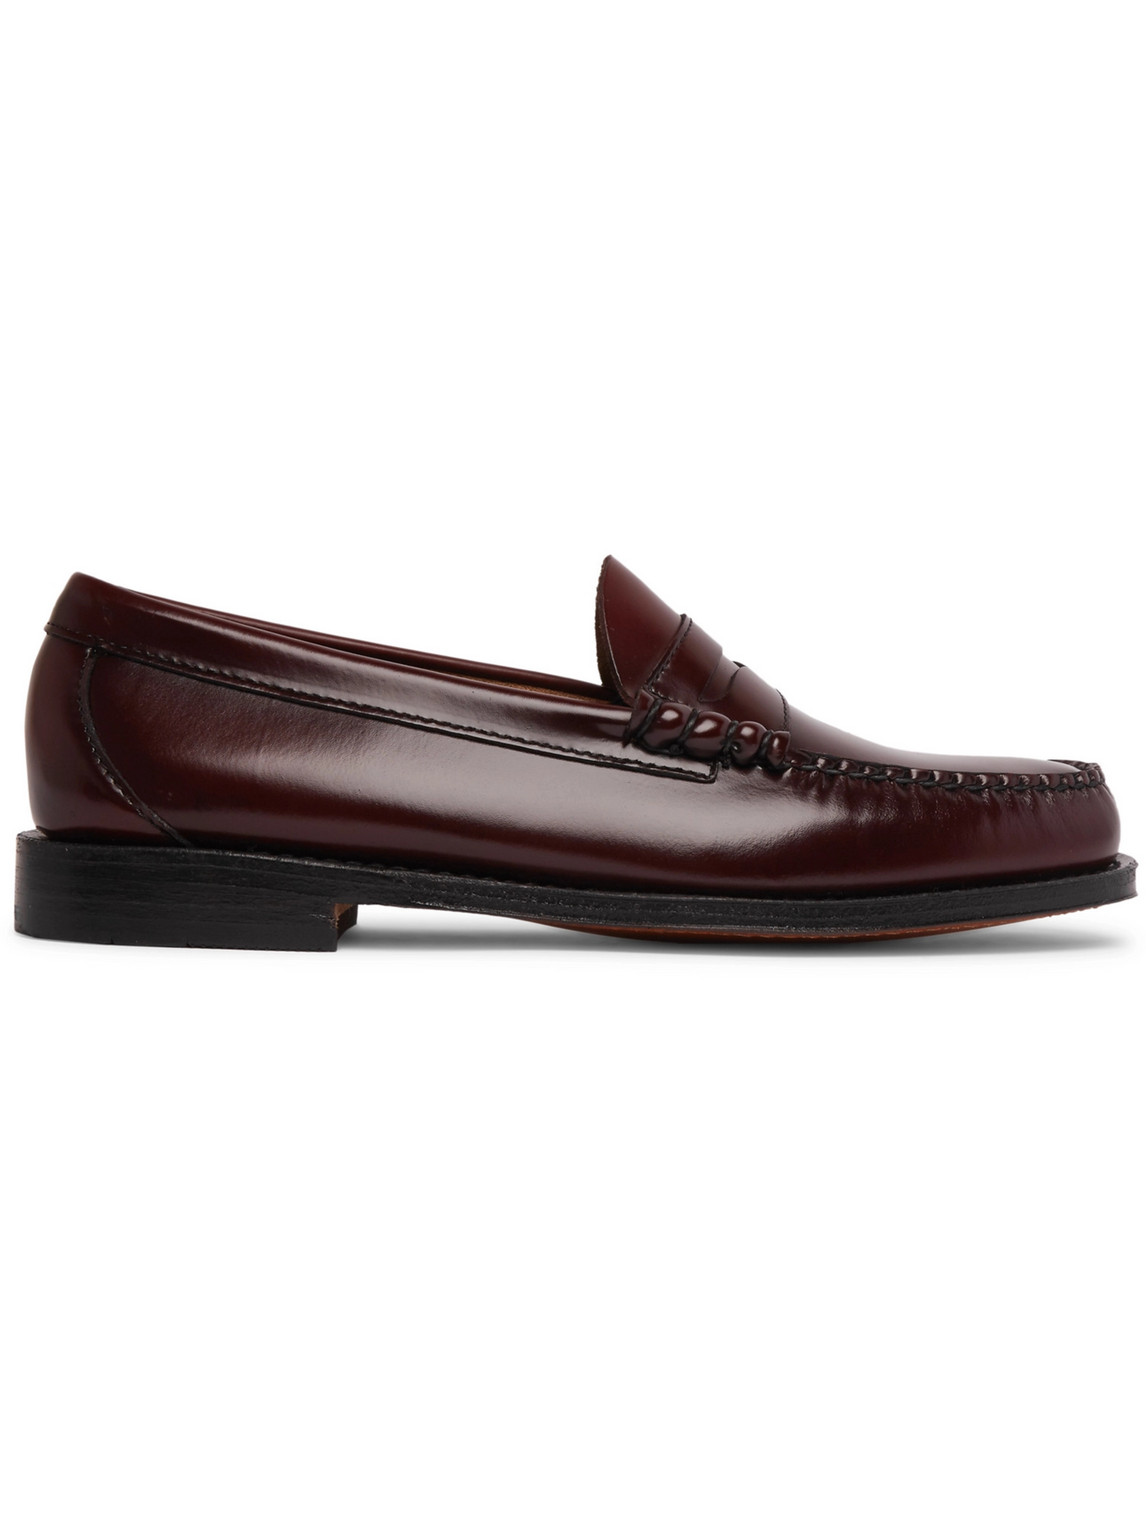 G.H. Bass & Co. - Weejuns Heritage Larson Leather Penny Loafers